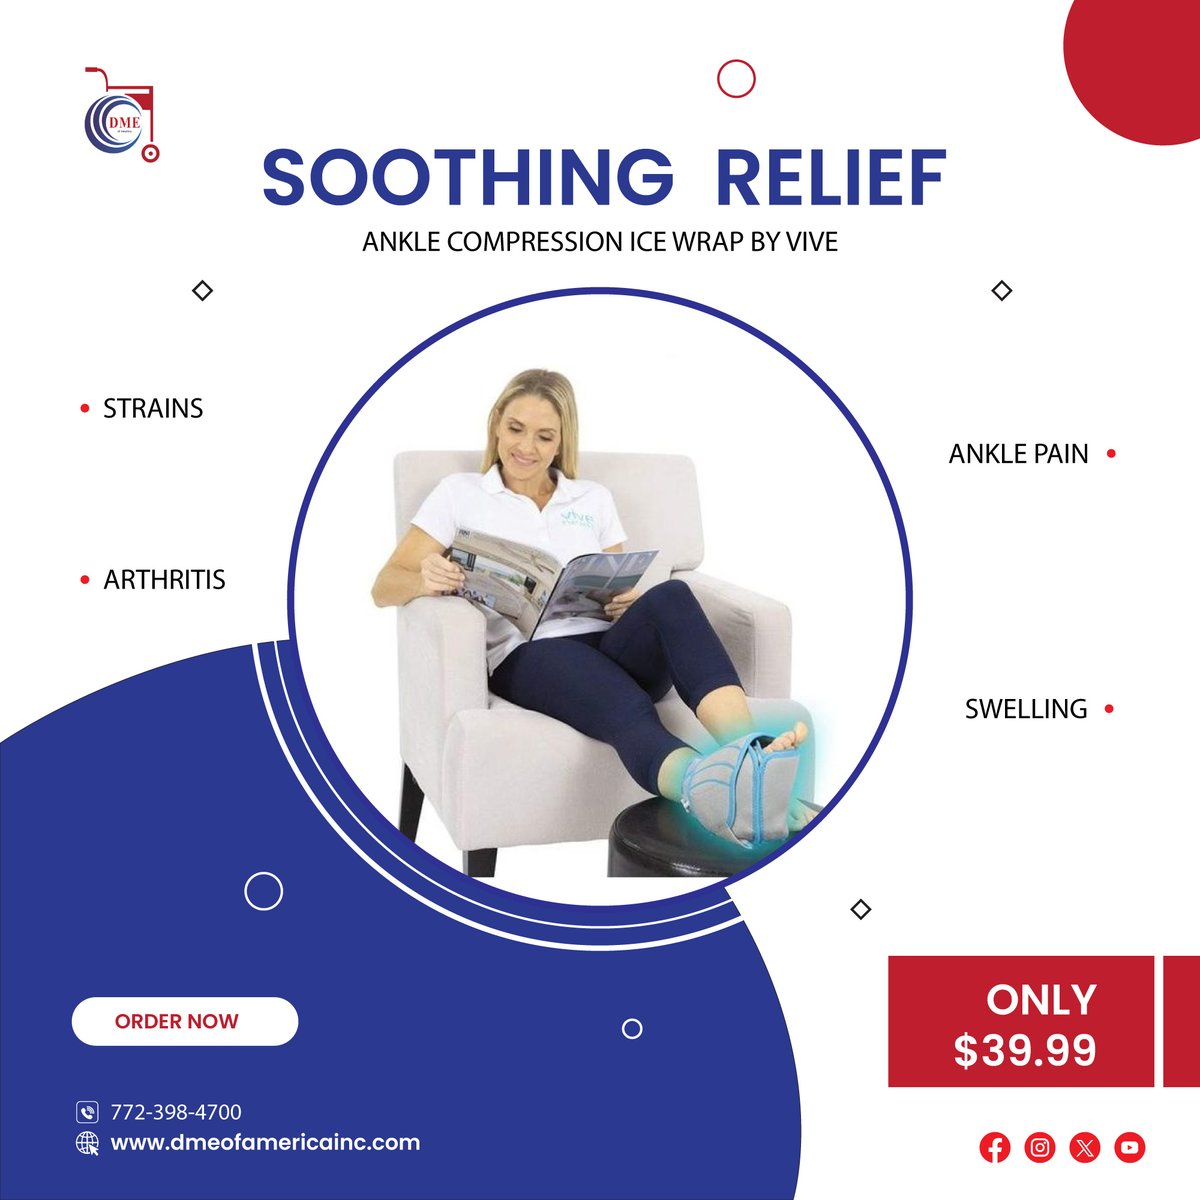 𝗖𝗵𝗶𝗹𝗹 & 𝗛𝗲𝗮𝗹 The Ultimate Ankle Relief! Say Goodbye to Pain, Strains, Swelling, and Arthritis with Our Ankle Compression Ice Wrap! Order at: dmeofamericainc.com/products/ankle… #healing #anklepain #painmanagment #painreleif #anklecare #medicalsupplies #dmeofamericainc